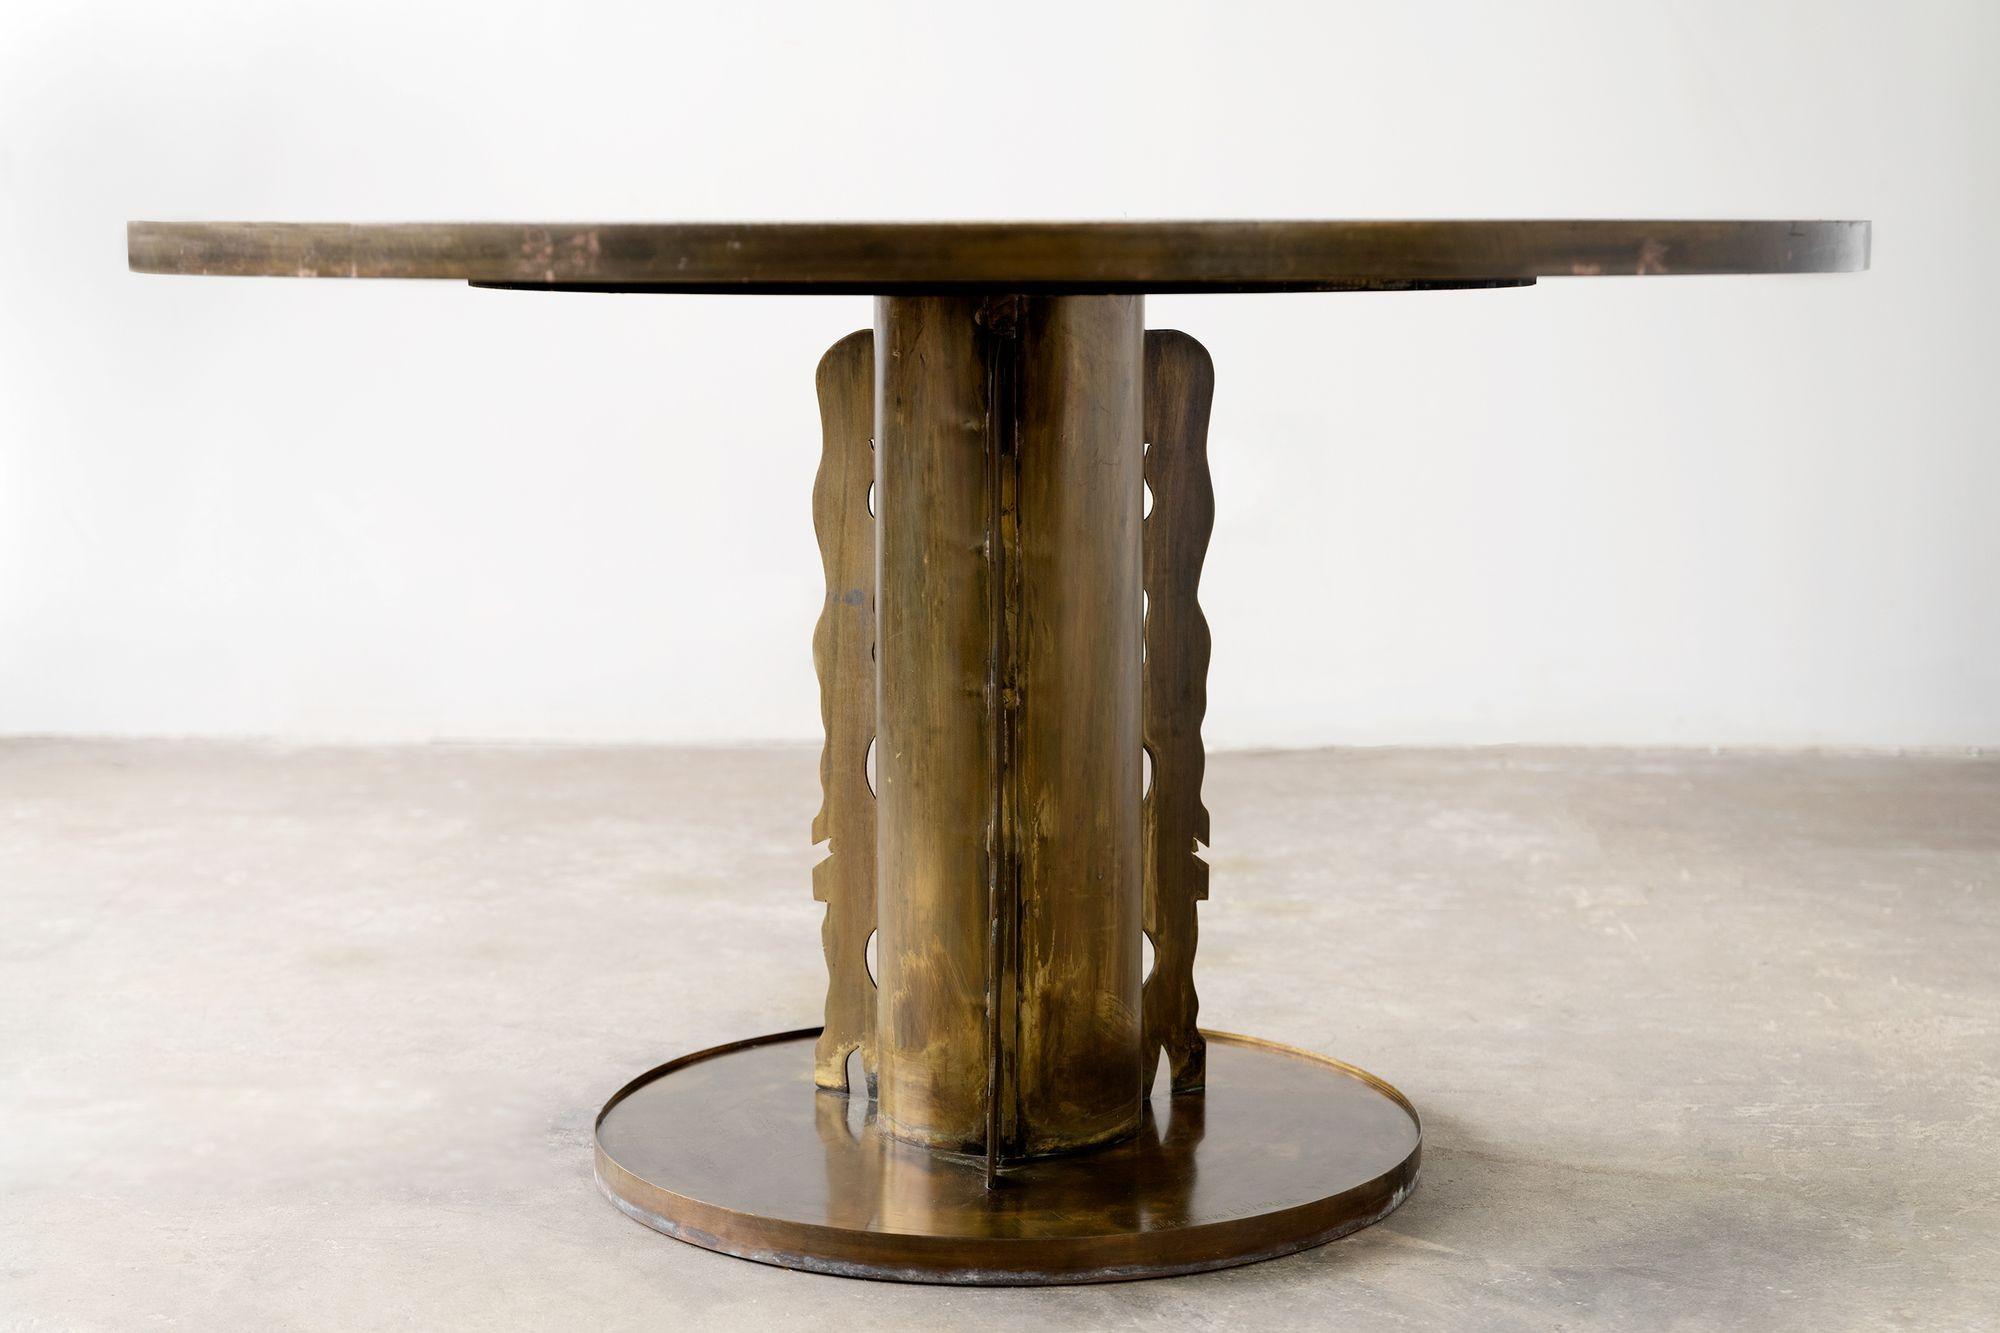 Etruscan dining or game table designed by Philip and Kelvin Laverne. Bronze forms embedded in pewter create a pattern reminiscent of ancient Etruscan artistry. The bronze pedestal is embellished with sculptured abstract forms adhering to the column